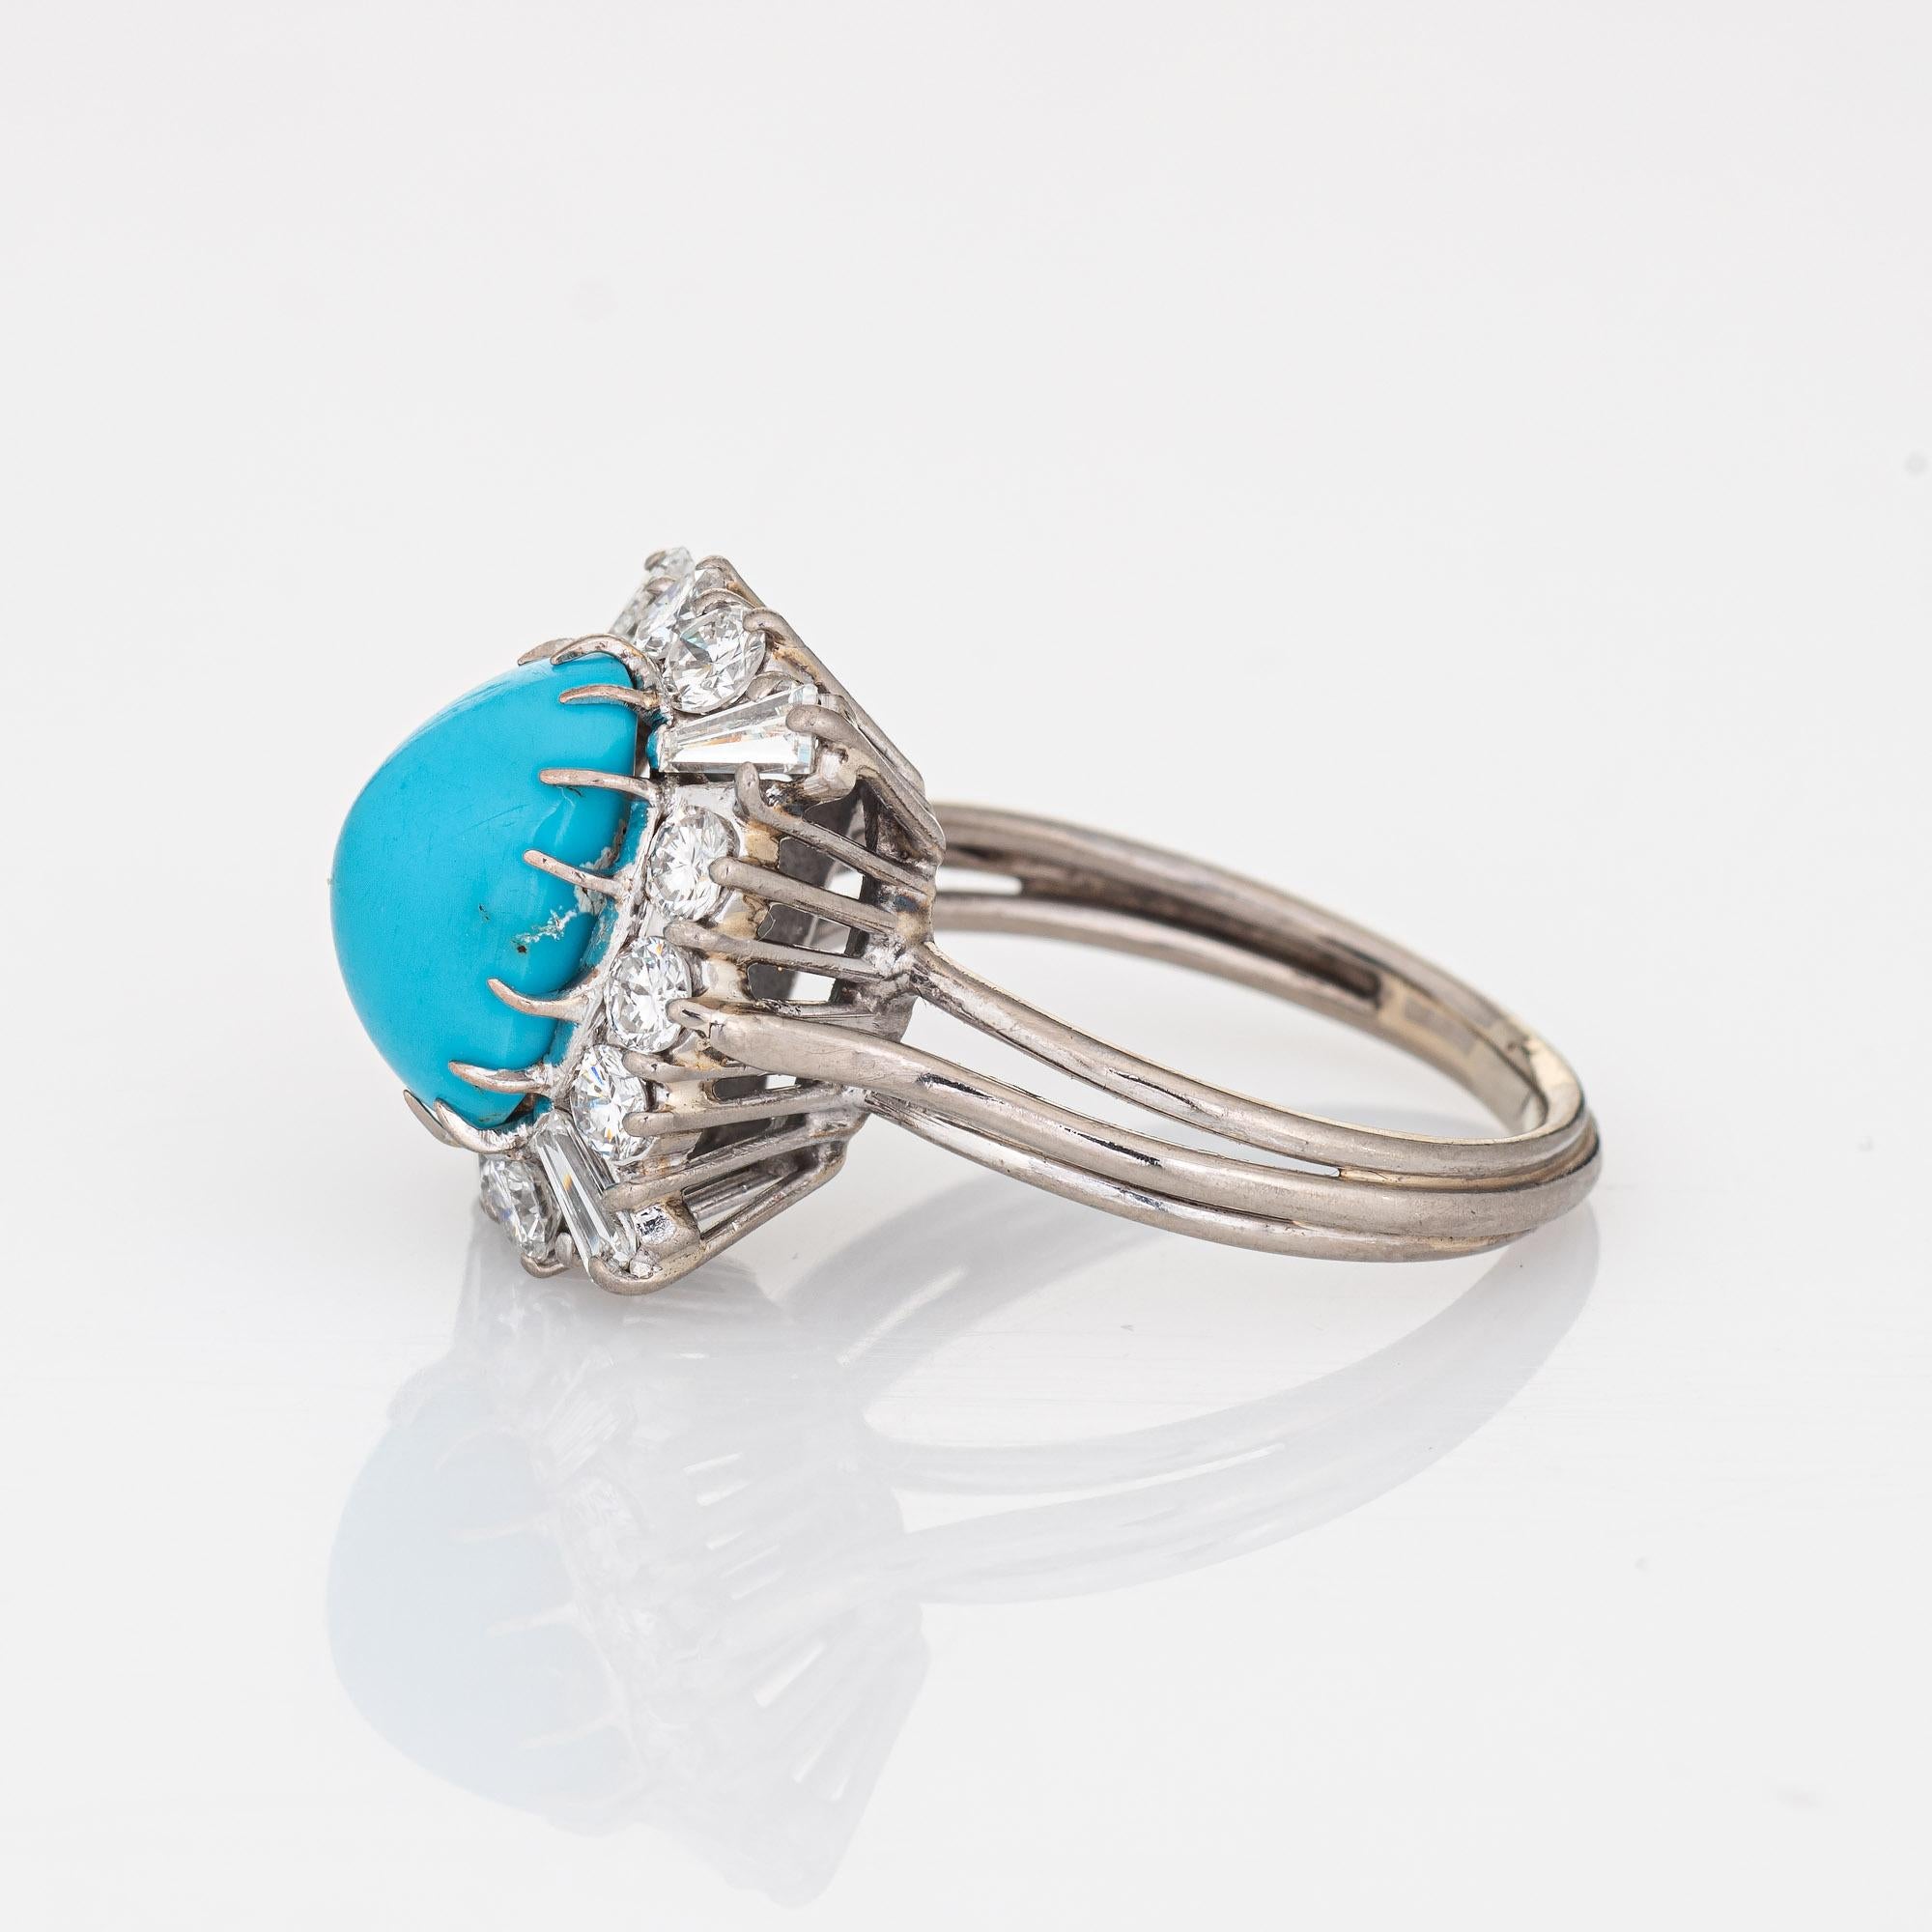 Modern 1ct Diamond Turquoise Square Ring Vintage 18k White Gold Cocktail Jewelry For Sale